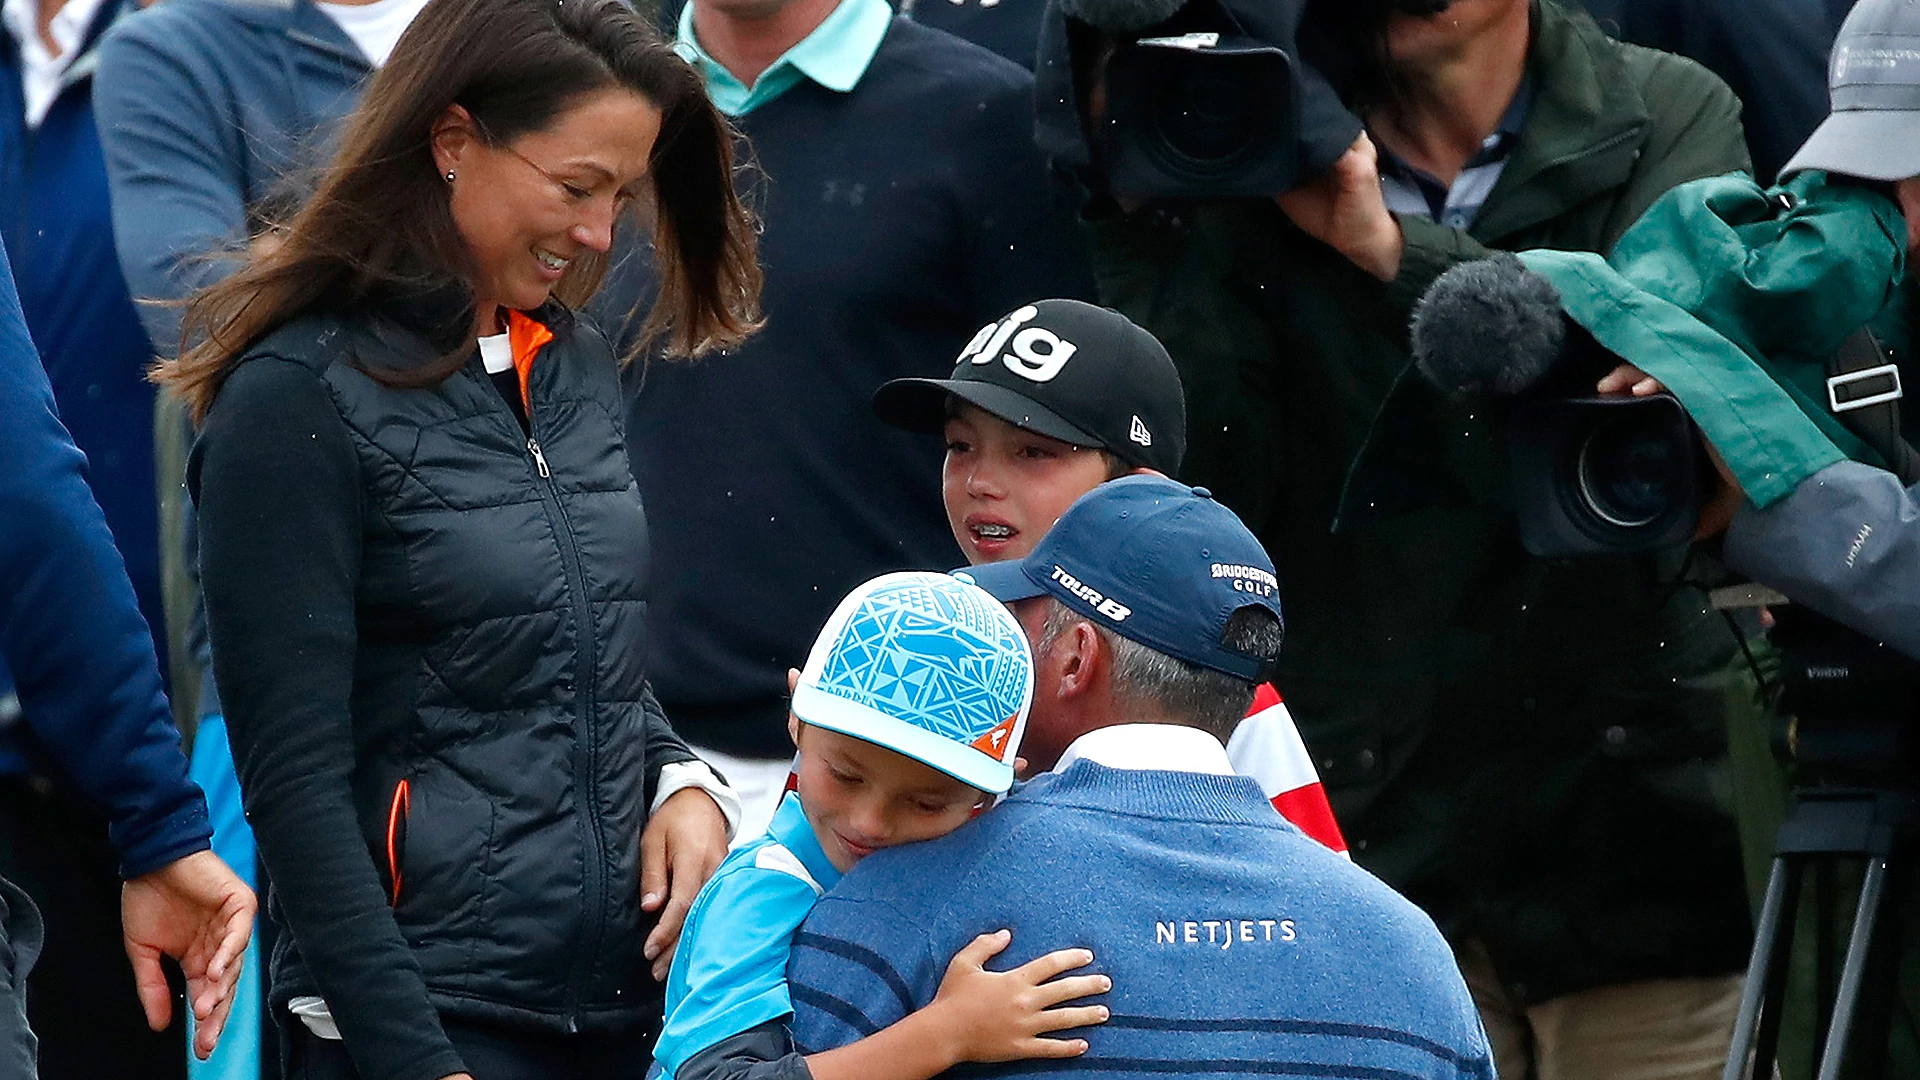 Kuchar gets 'teary surprise' from family on 18th green 4